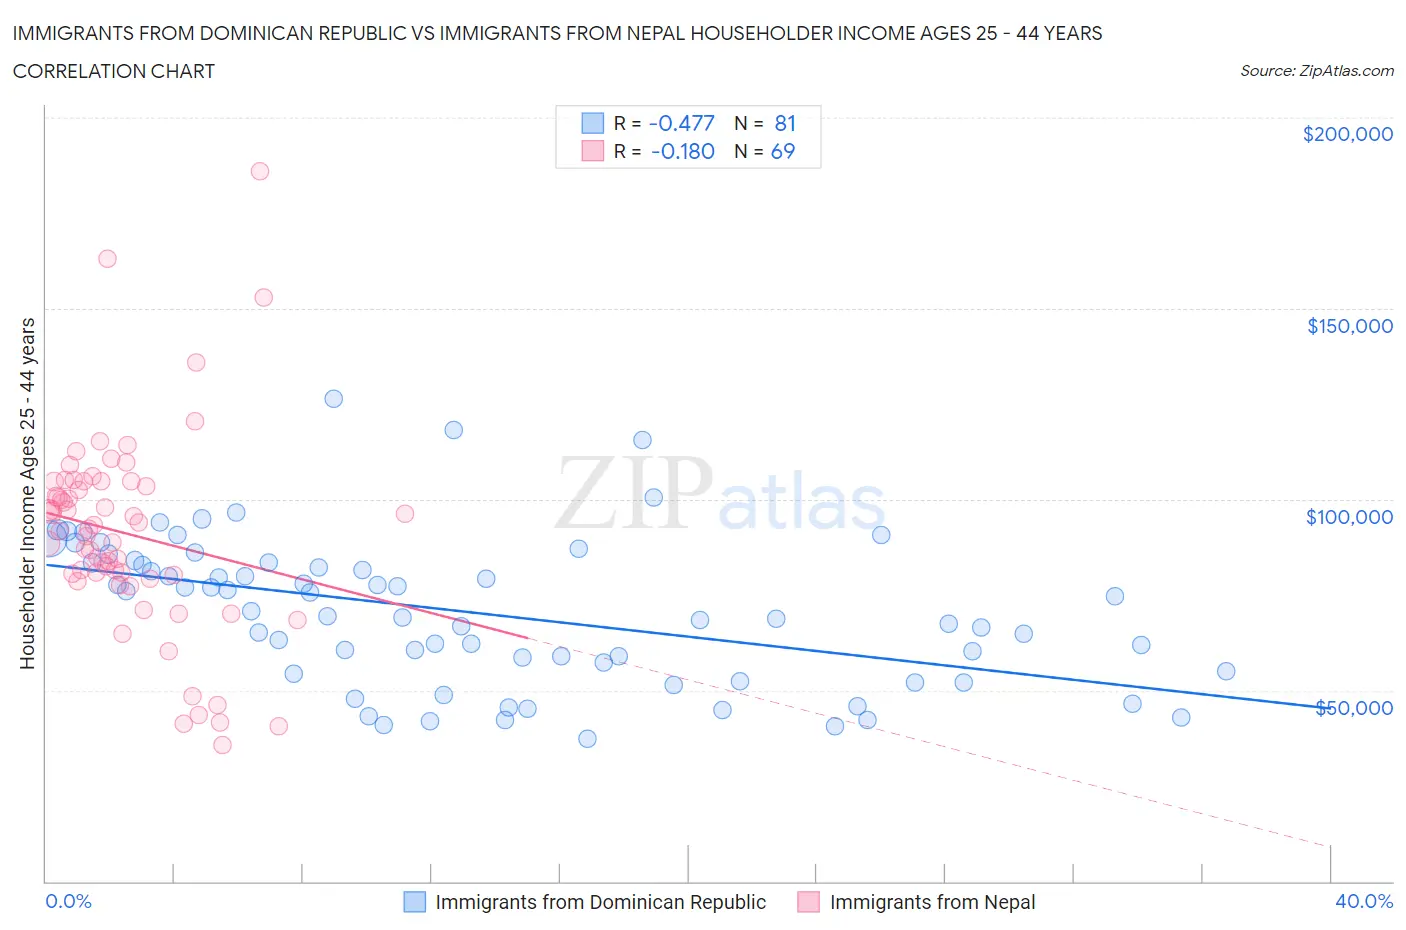 Immigrants from Dominican Republic vs Immigrants from Nepal Householder Income Ages 25 - 44 years